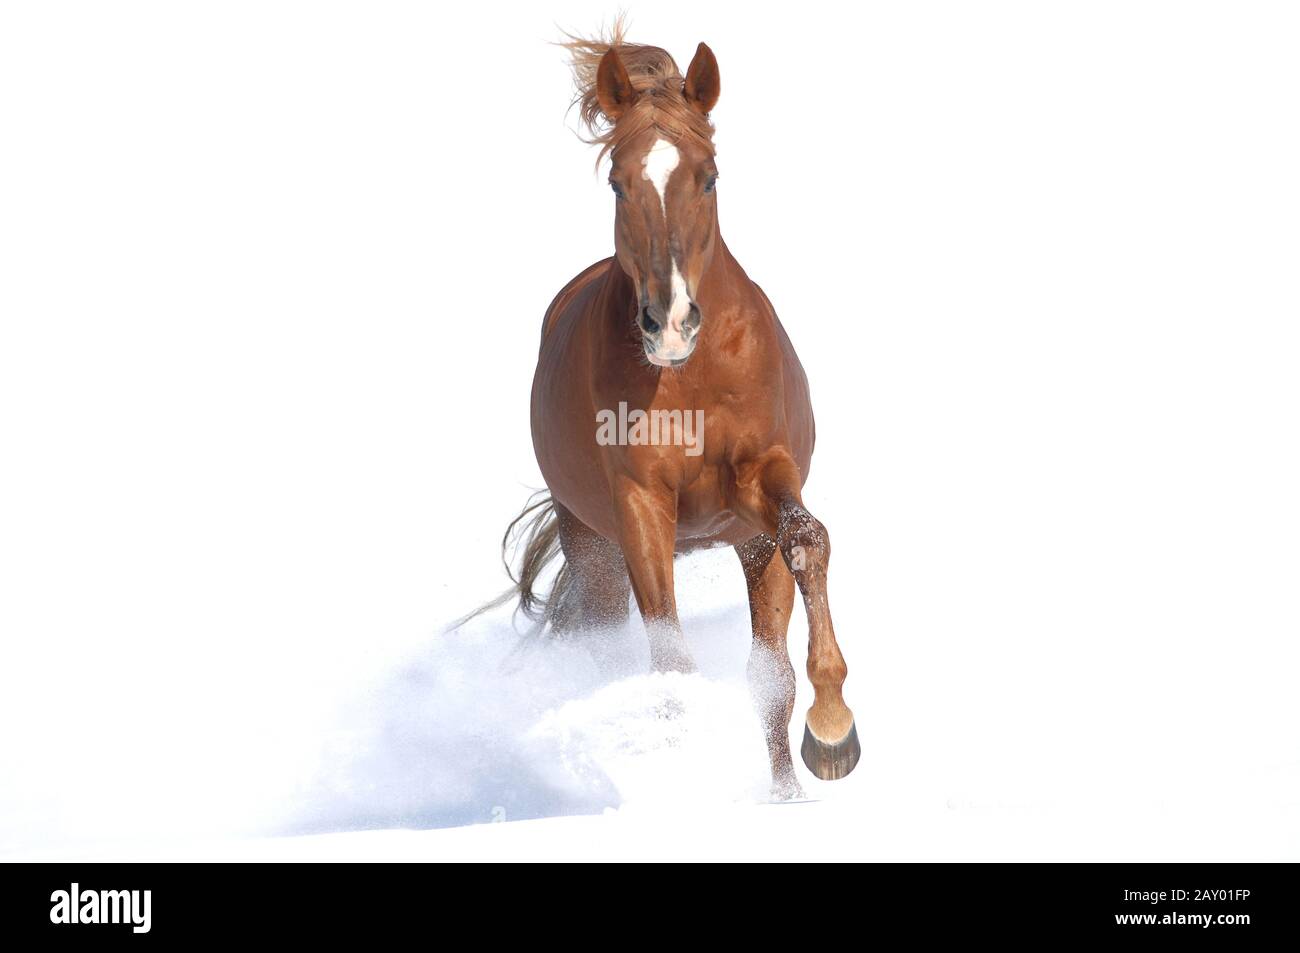 Thoroughbred Cut Out Stock Images Pictures Alamy